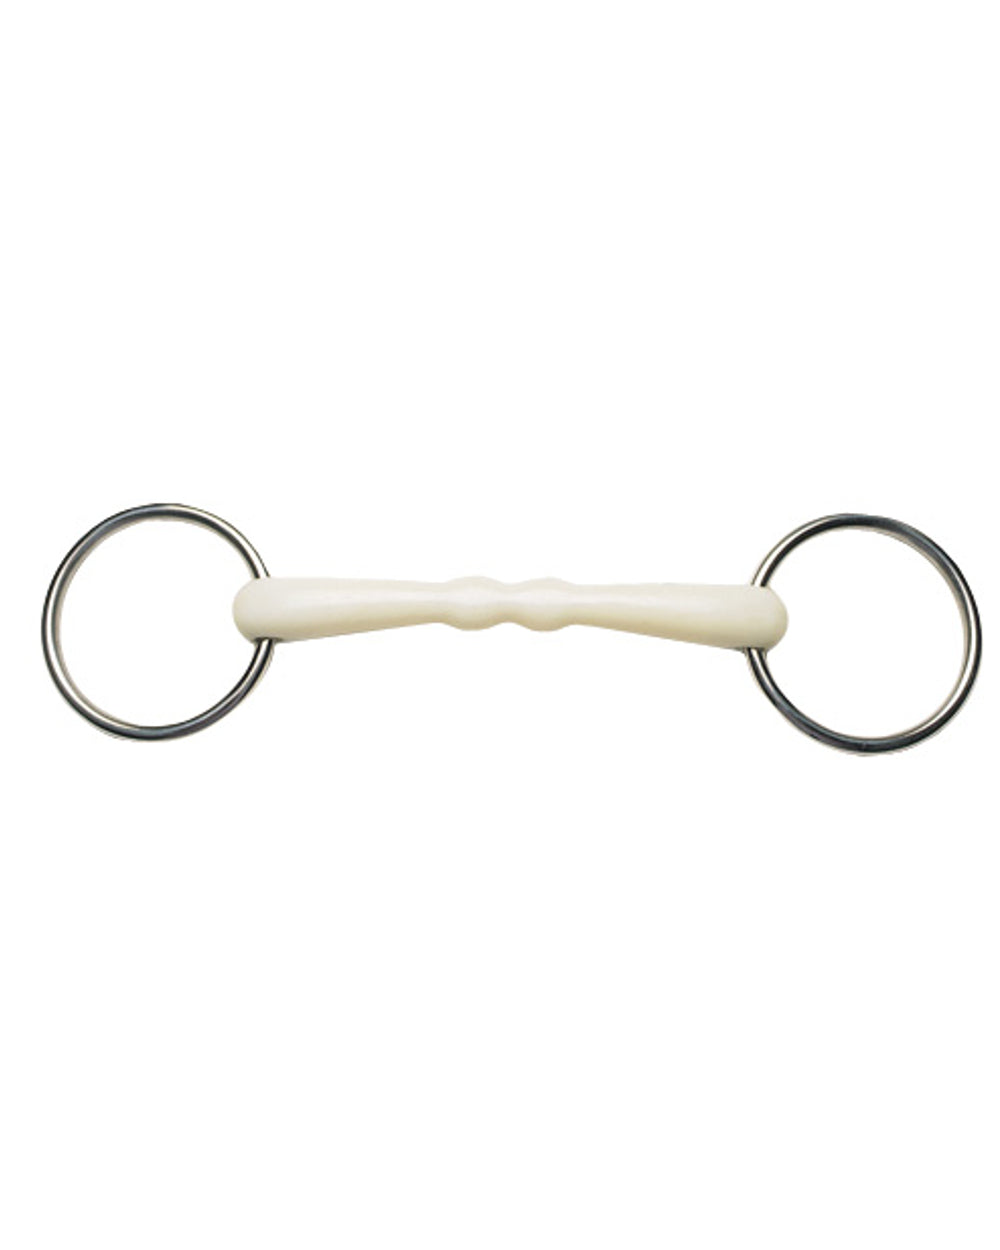 Ivory coloured Korsteel Flexi Loose Ring Mullen Mouth Snaffle Bit on white background 